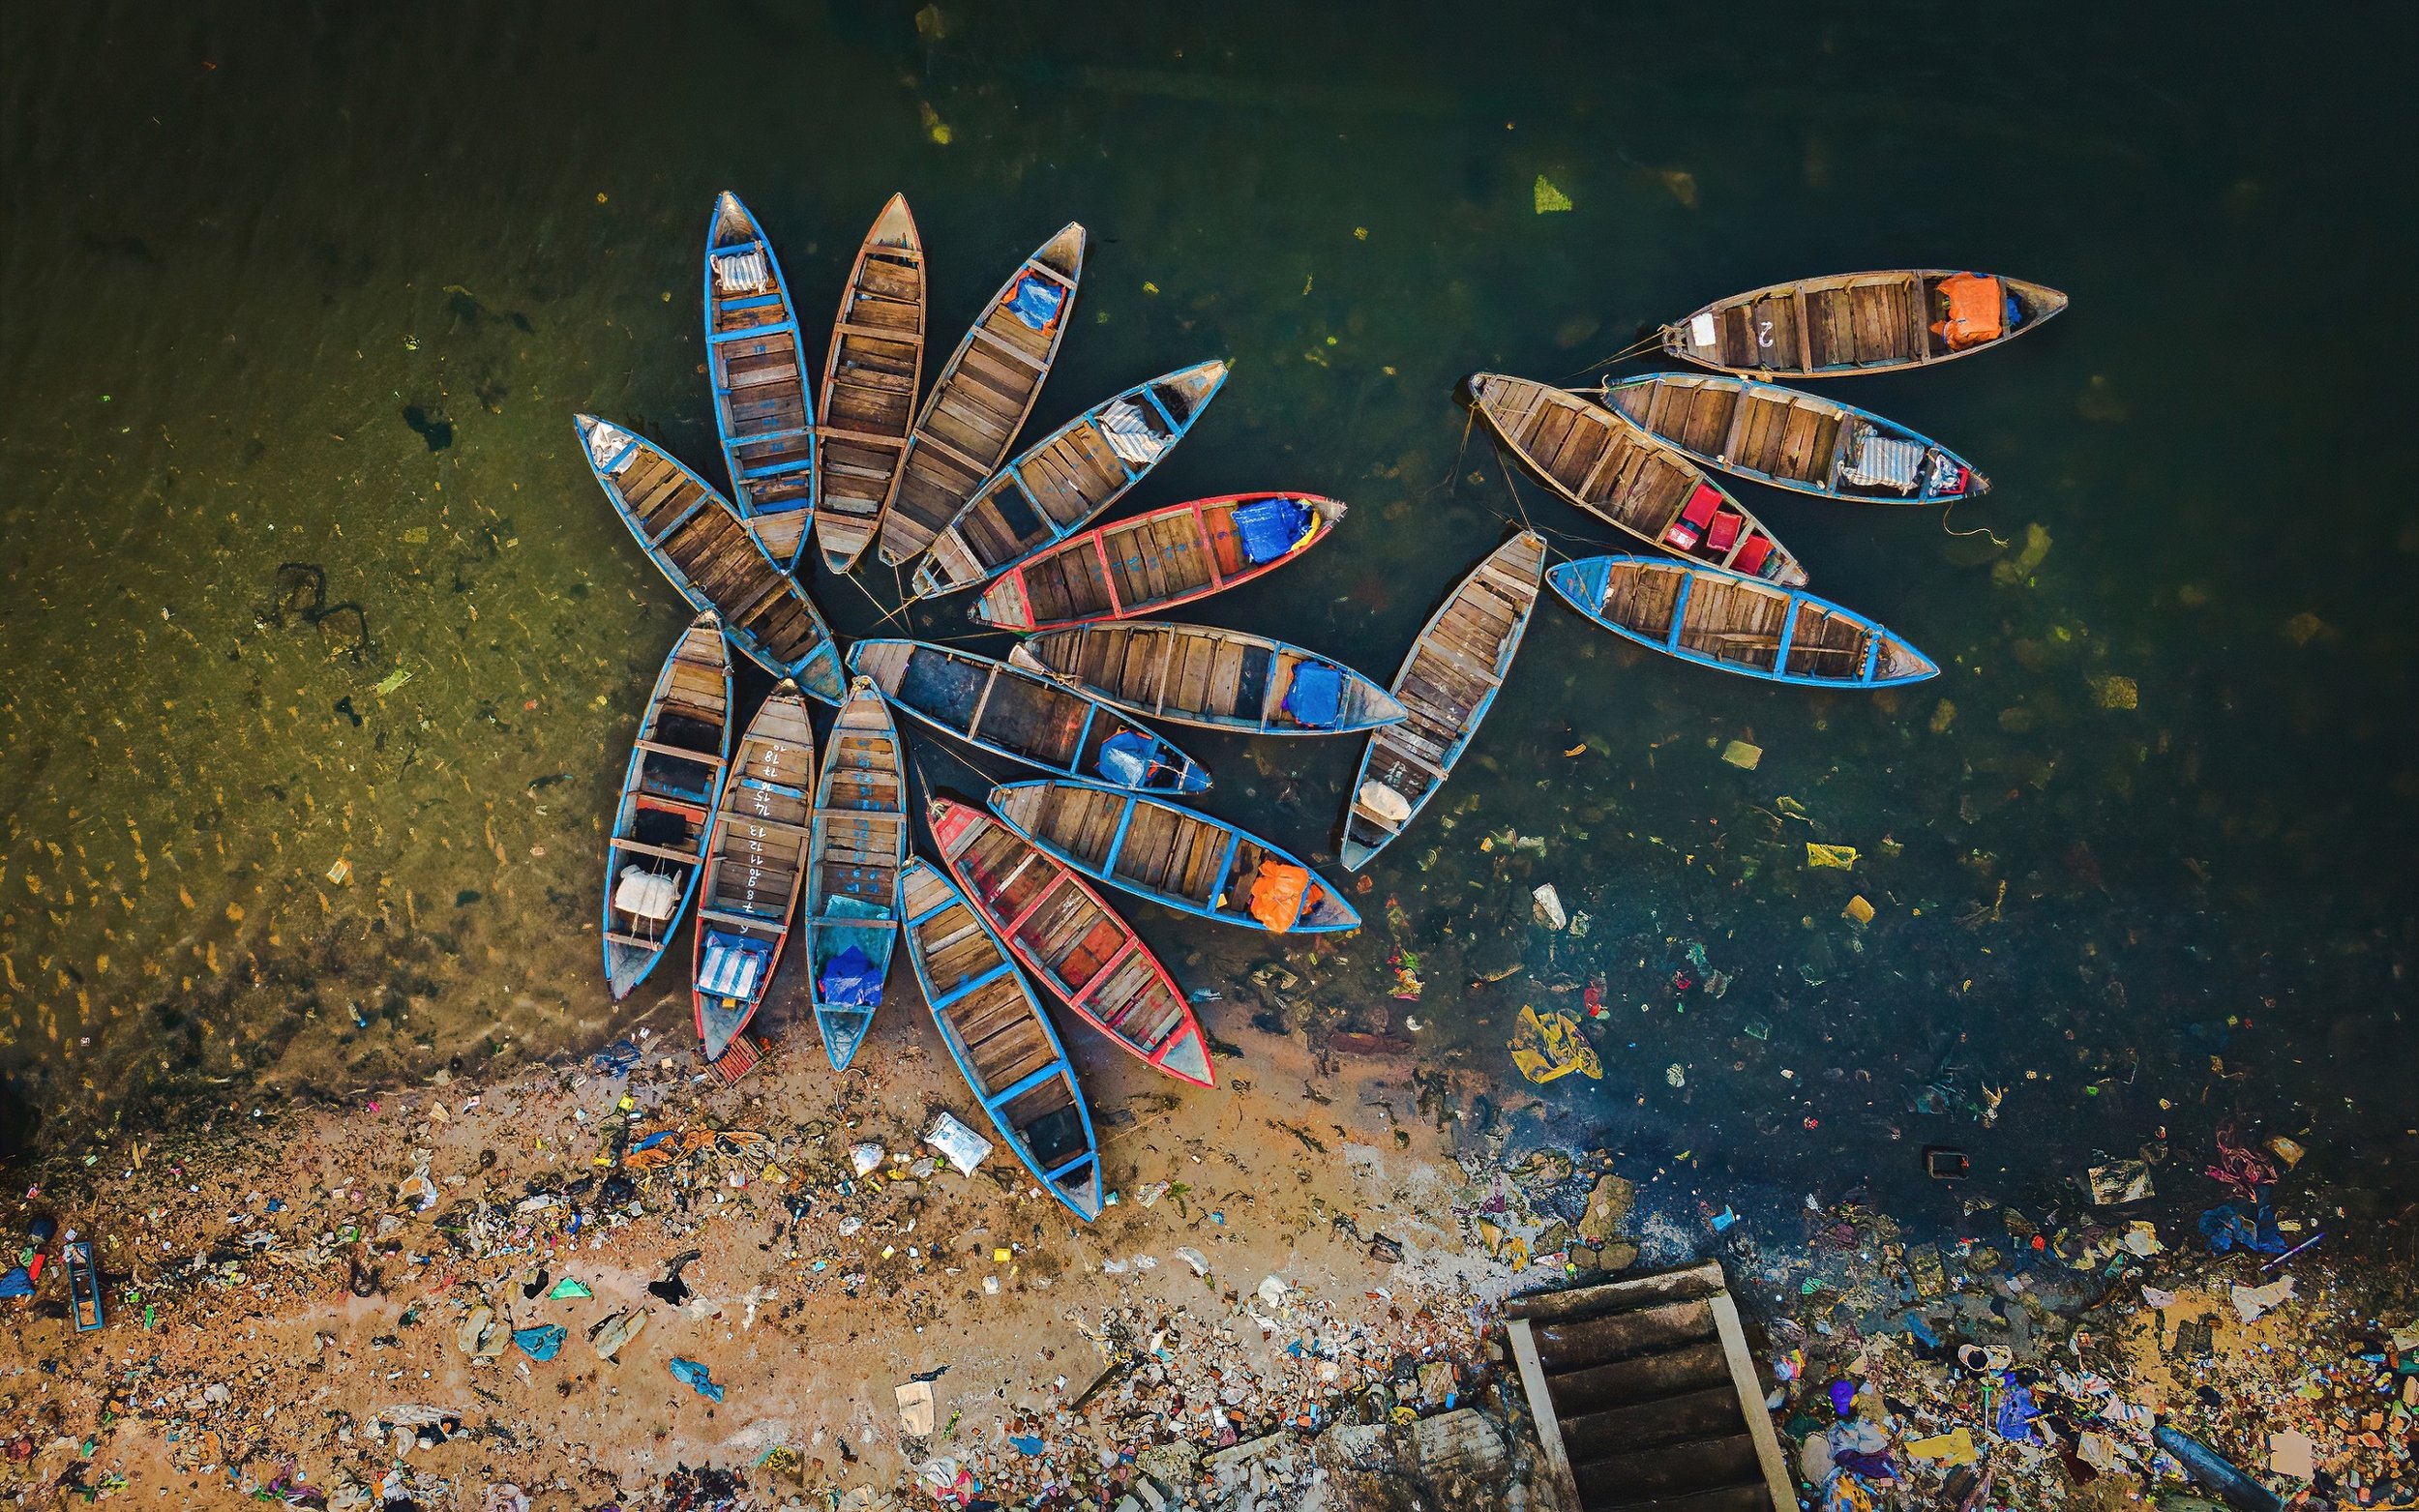 Alex Cao: Boat Flower in Pollution